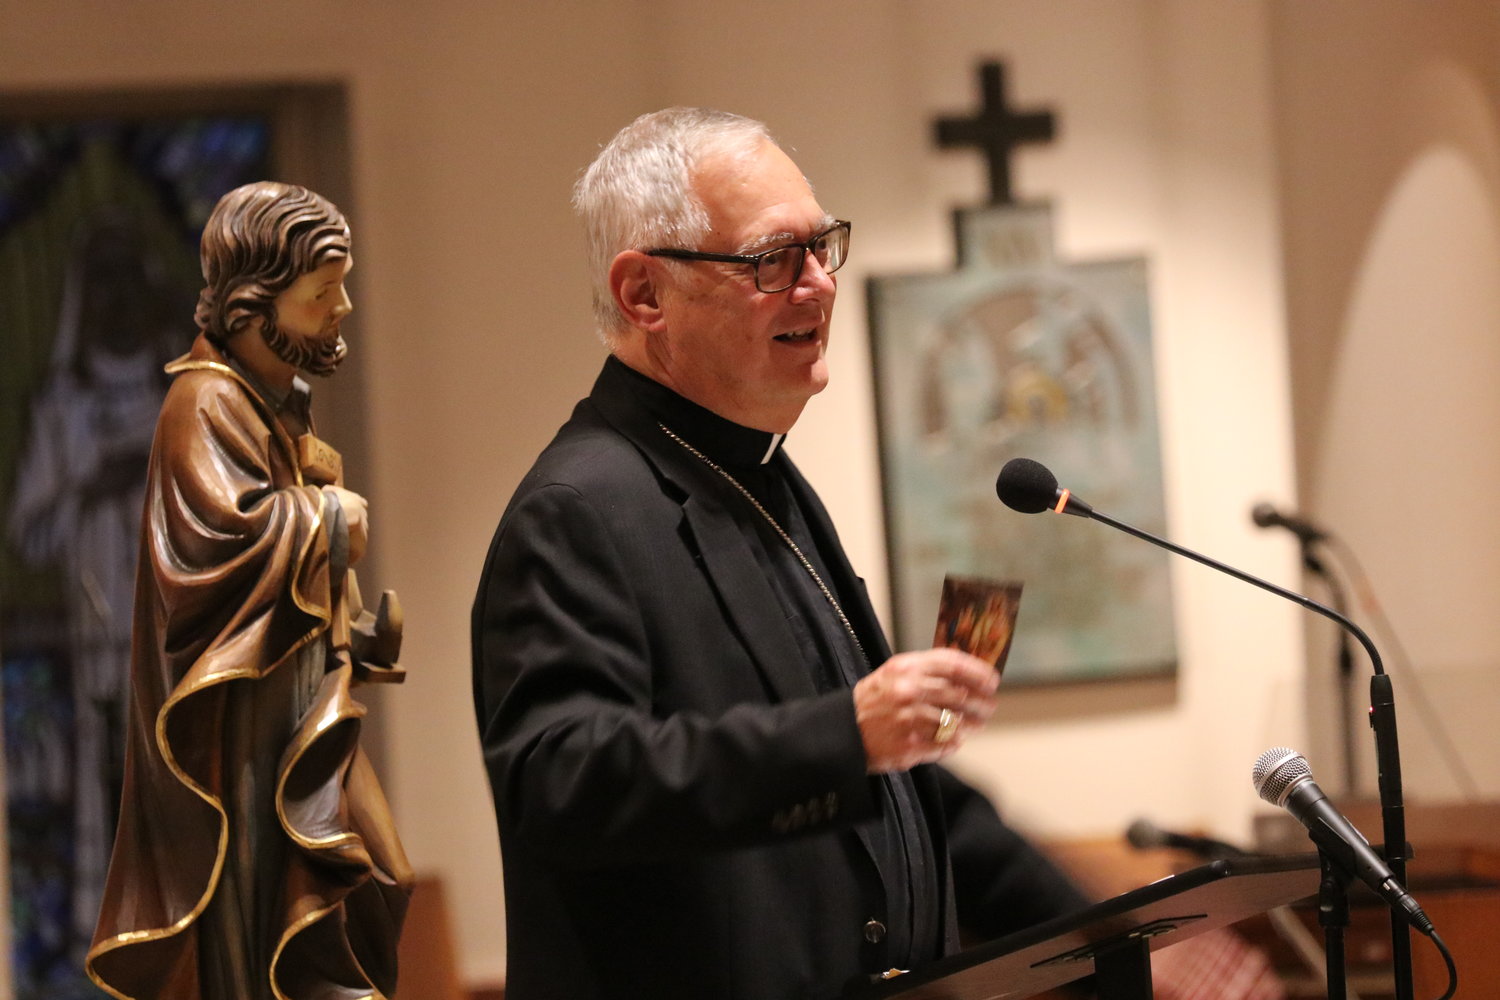 Bishop Thomas J. Tobin introduces Mike Aquilina, an author of works on St. Joseph, who spoke in the second event in the sesquicentennial celebration of the diocese.